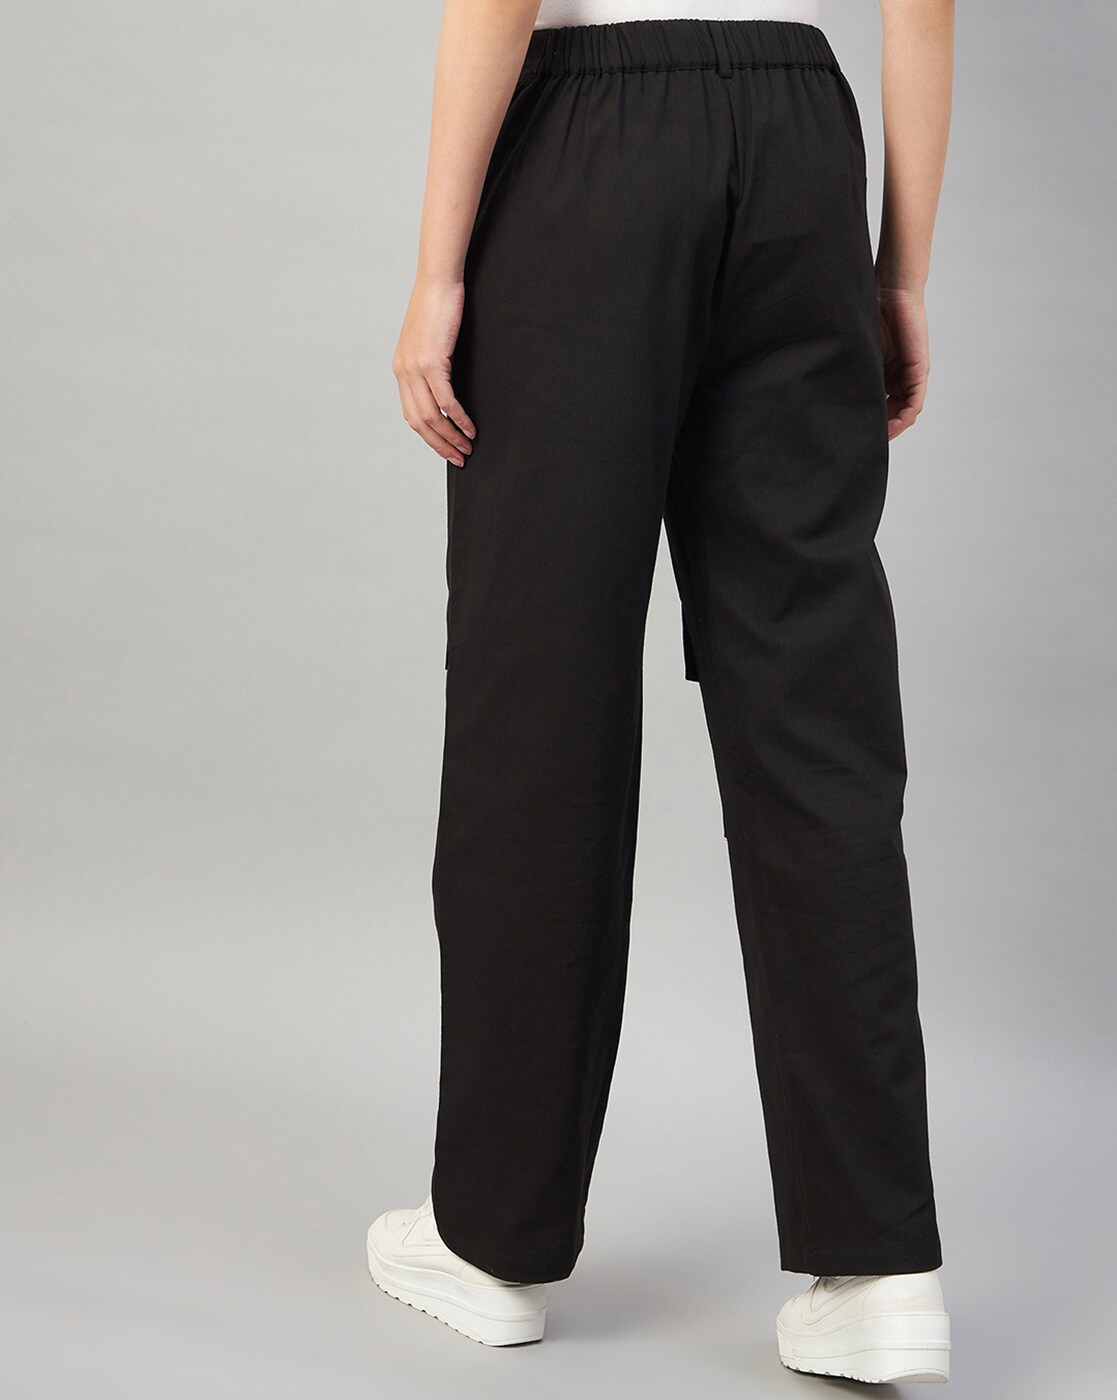 Buy Black Trousers & Pants for Women by ORCHID BLUES Online